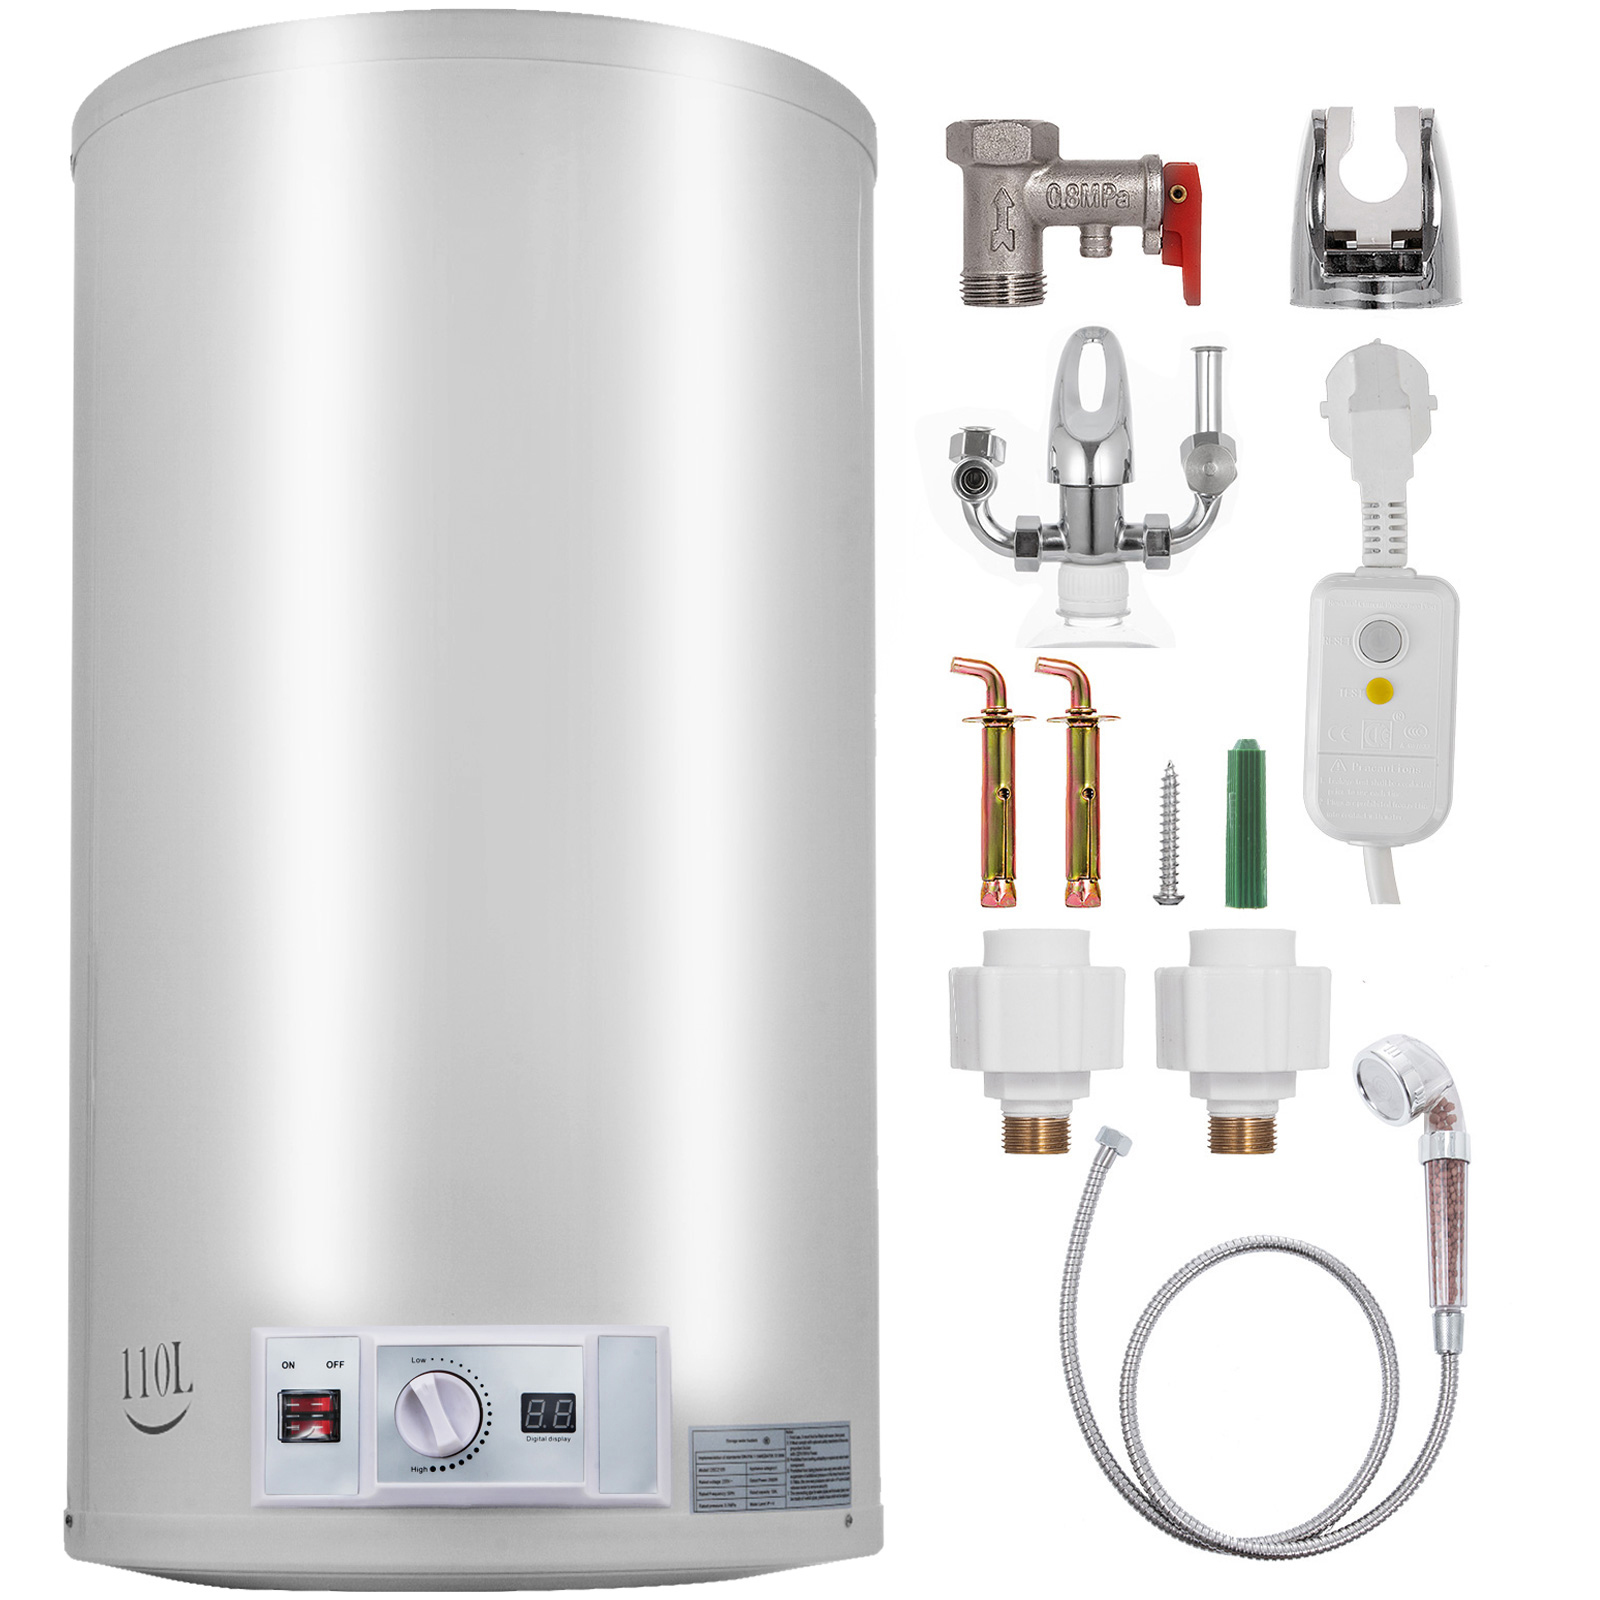 https://d2qc09rl1gfuof.cloudfront.net/product/DRSQ120LCSS3KWYX1/hot-water-heater-m100-1.2.jpg